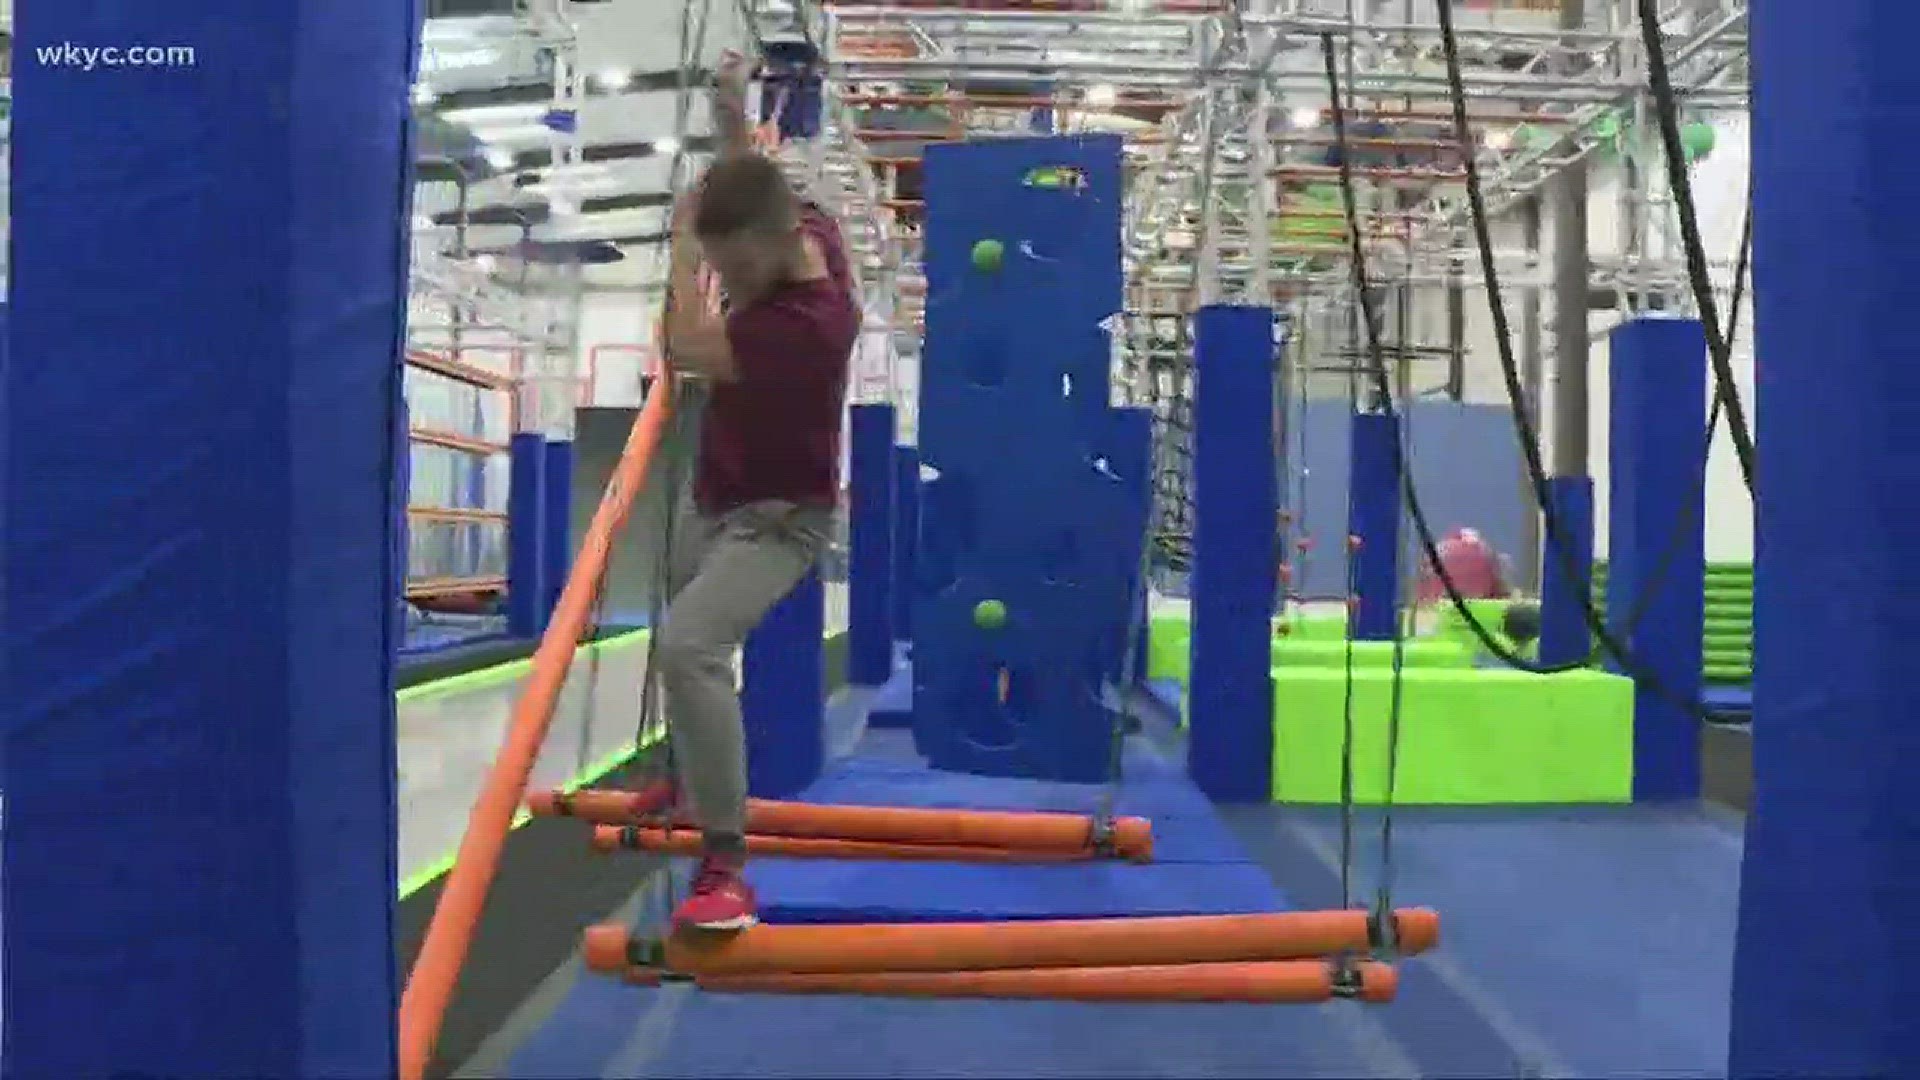 Time to play! Indoor adventure park opens in Avon